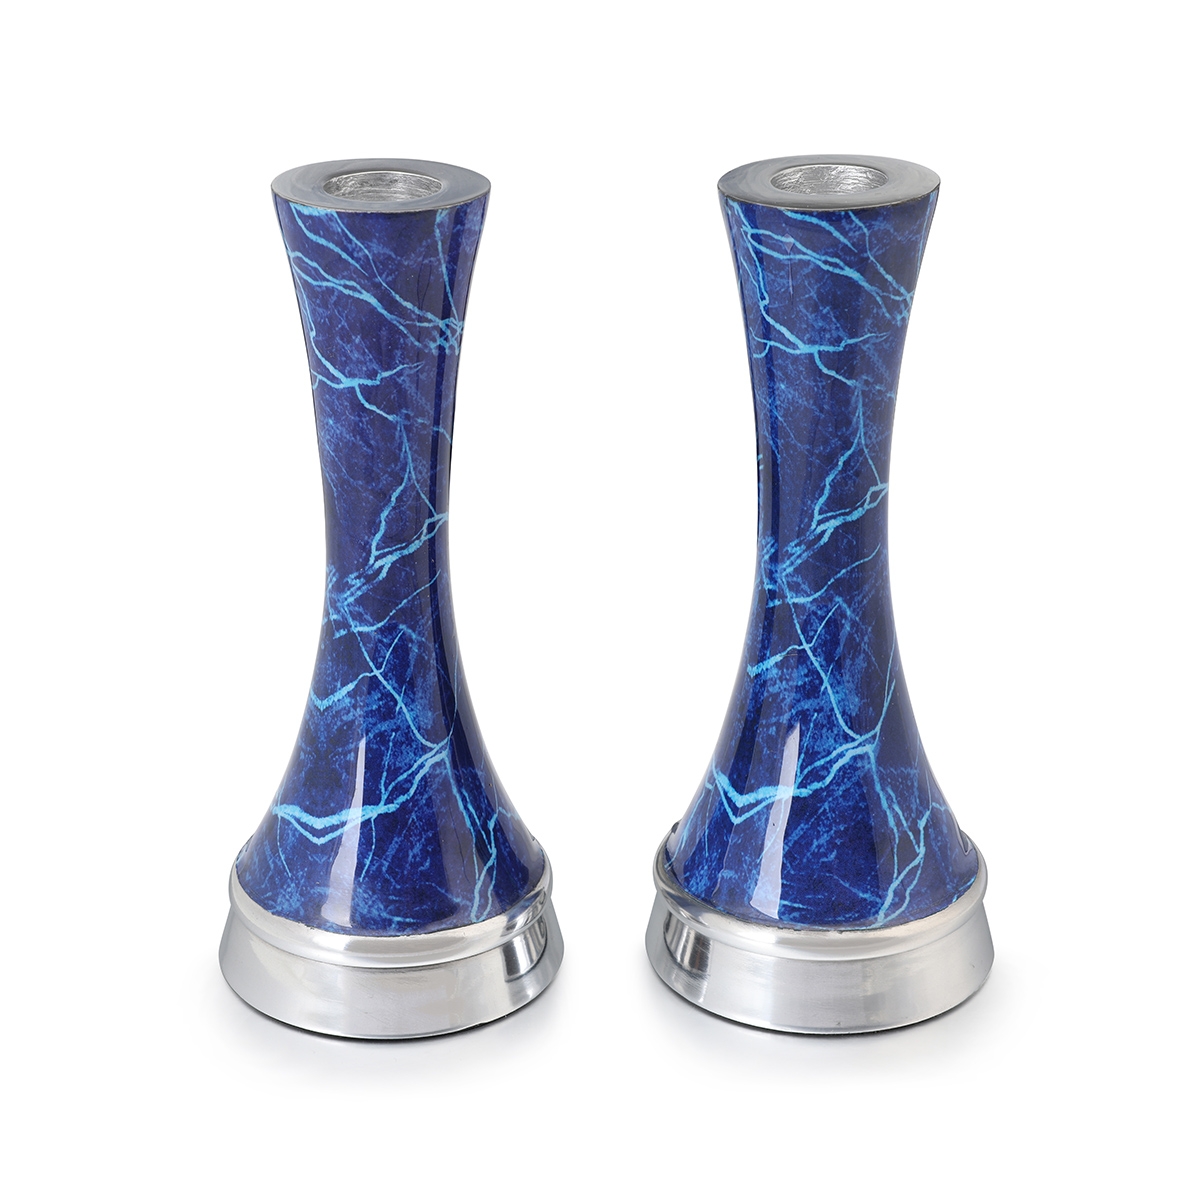 Tapered Shabbat Candlesticks With Blue Marble Design - 1